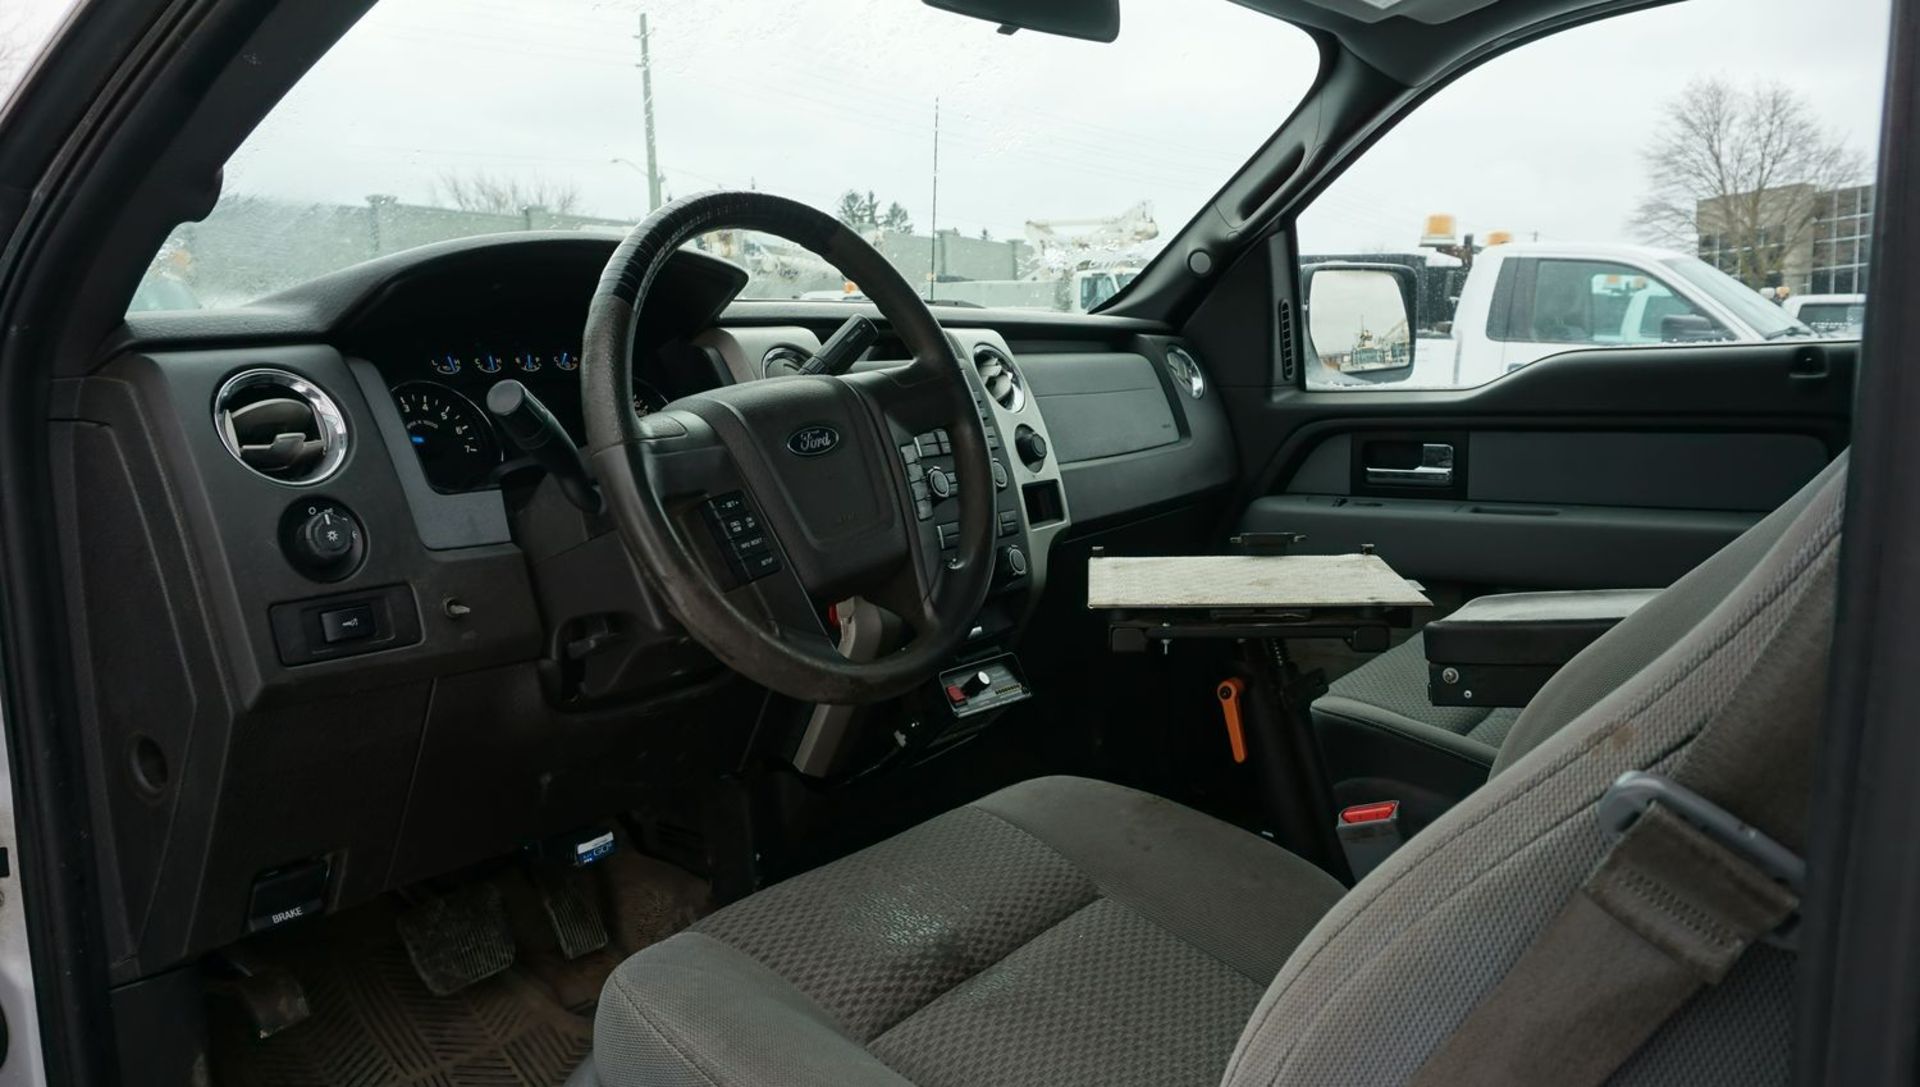 2014 FORD F150XL REG CAB 4X2 PICKUP W/ 5.0L V8 GAS ENGINE C/W (2) WEATHER GUARD HI-SIDE TOOL BOXES, - Image 8 of 8